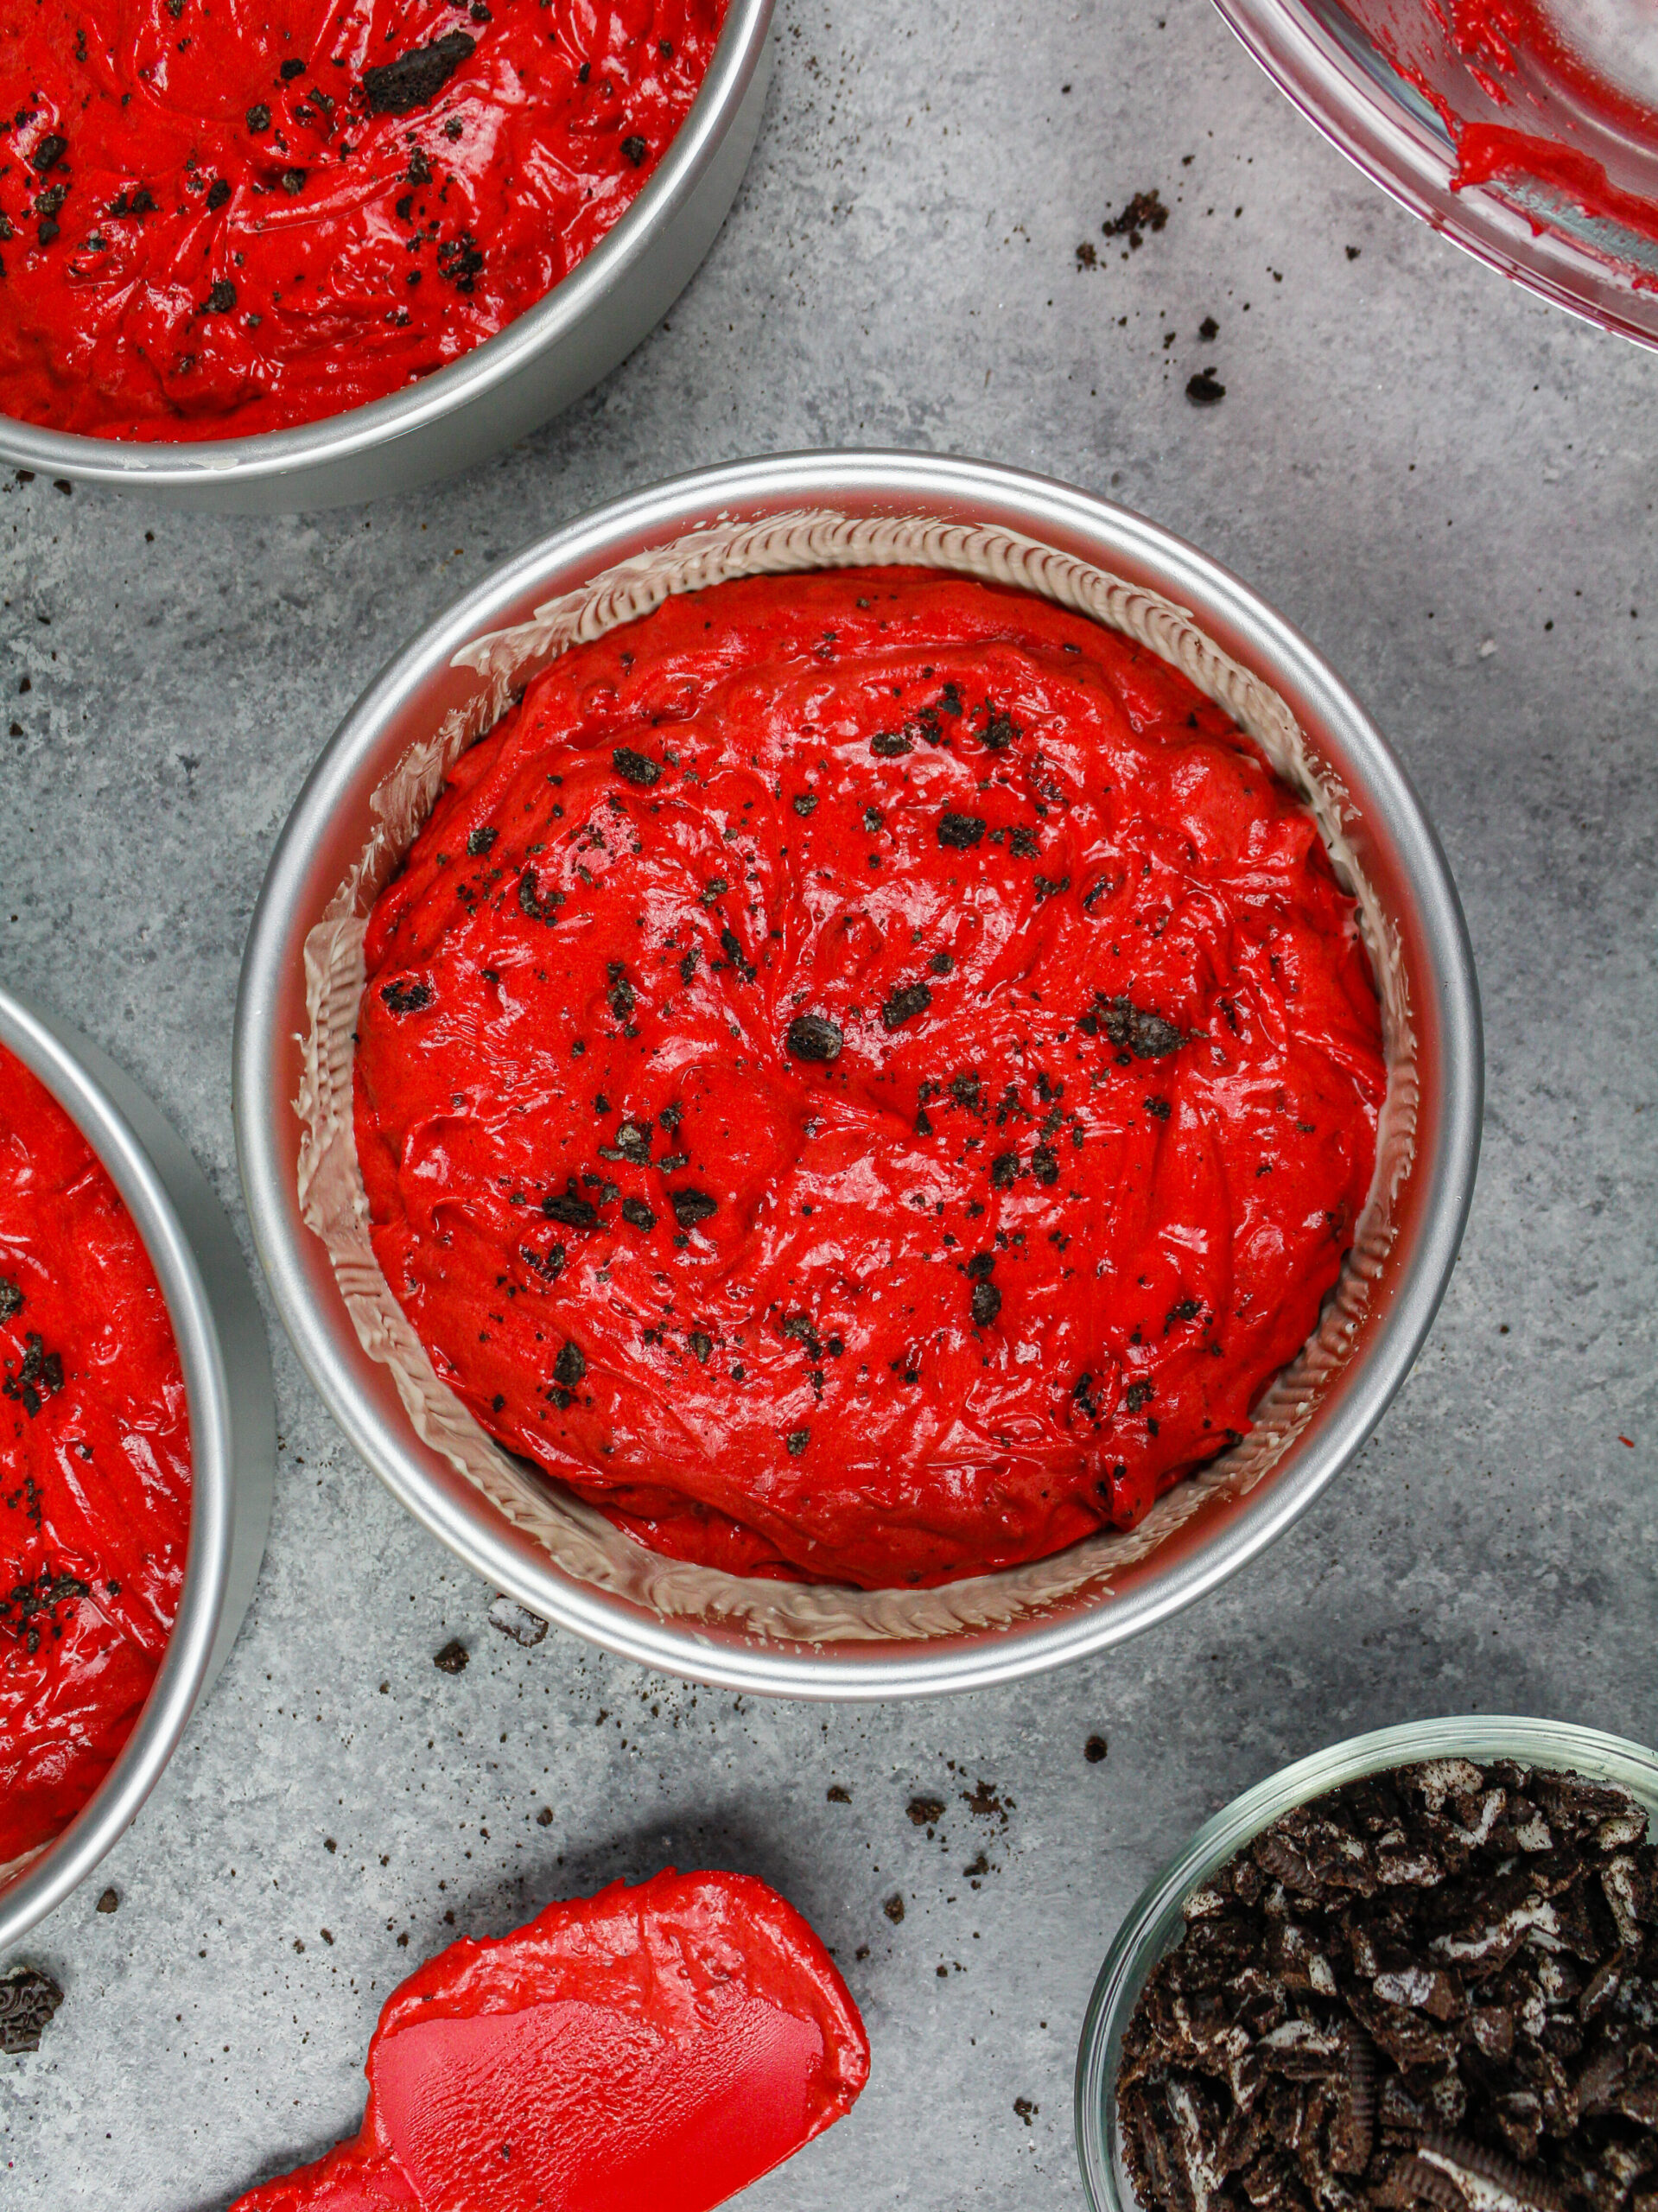 image of red velvet oreo cake batter in a 6-inch cake pan ready to be baked